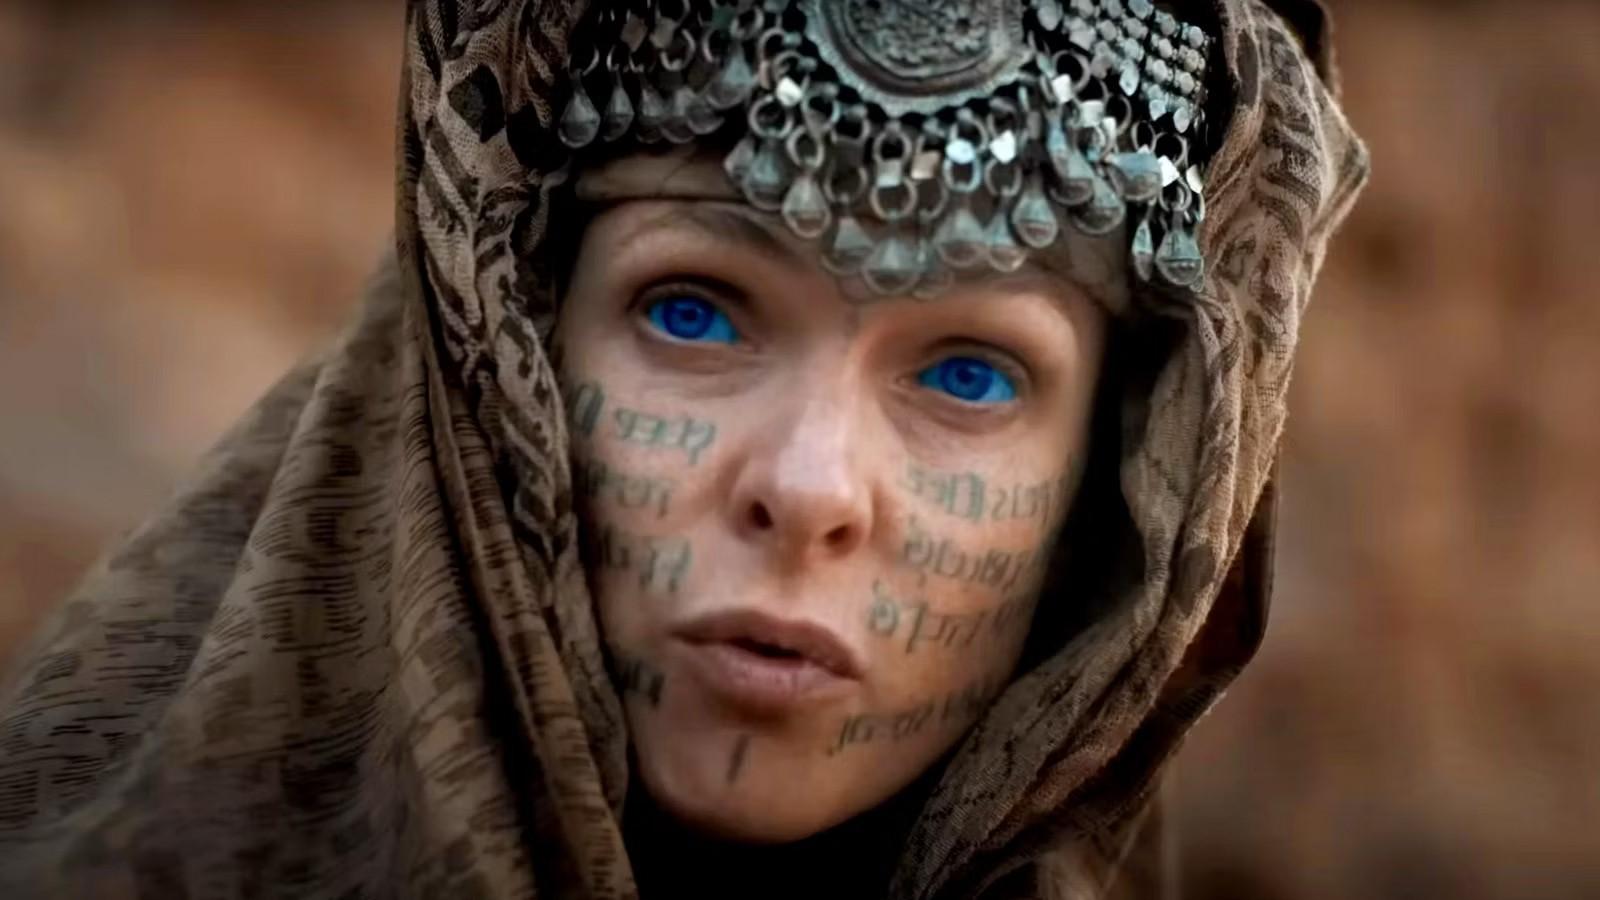 Rebecca Ferguson as Lady Jessica in Dune 2, with writing across her face